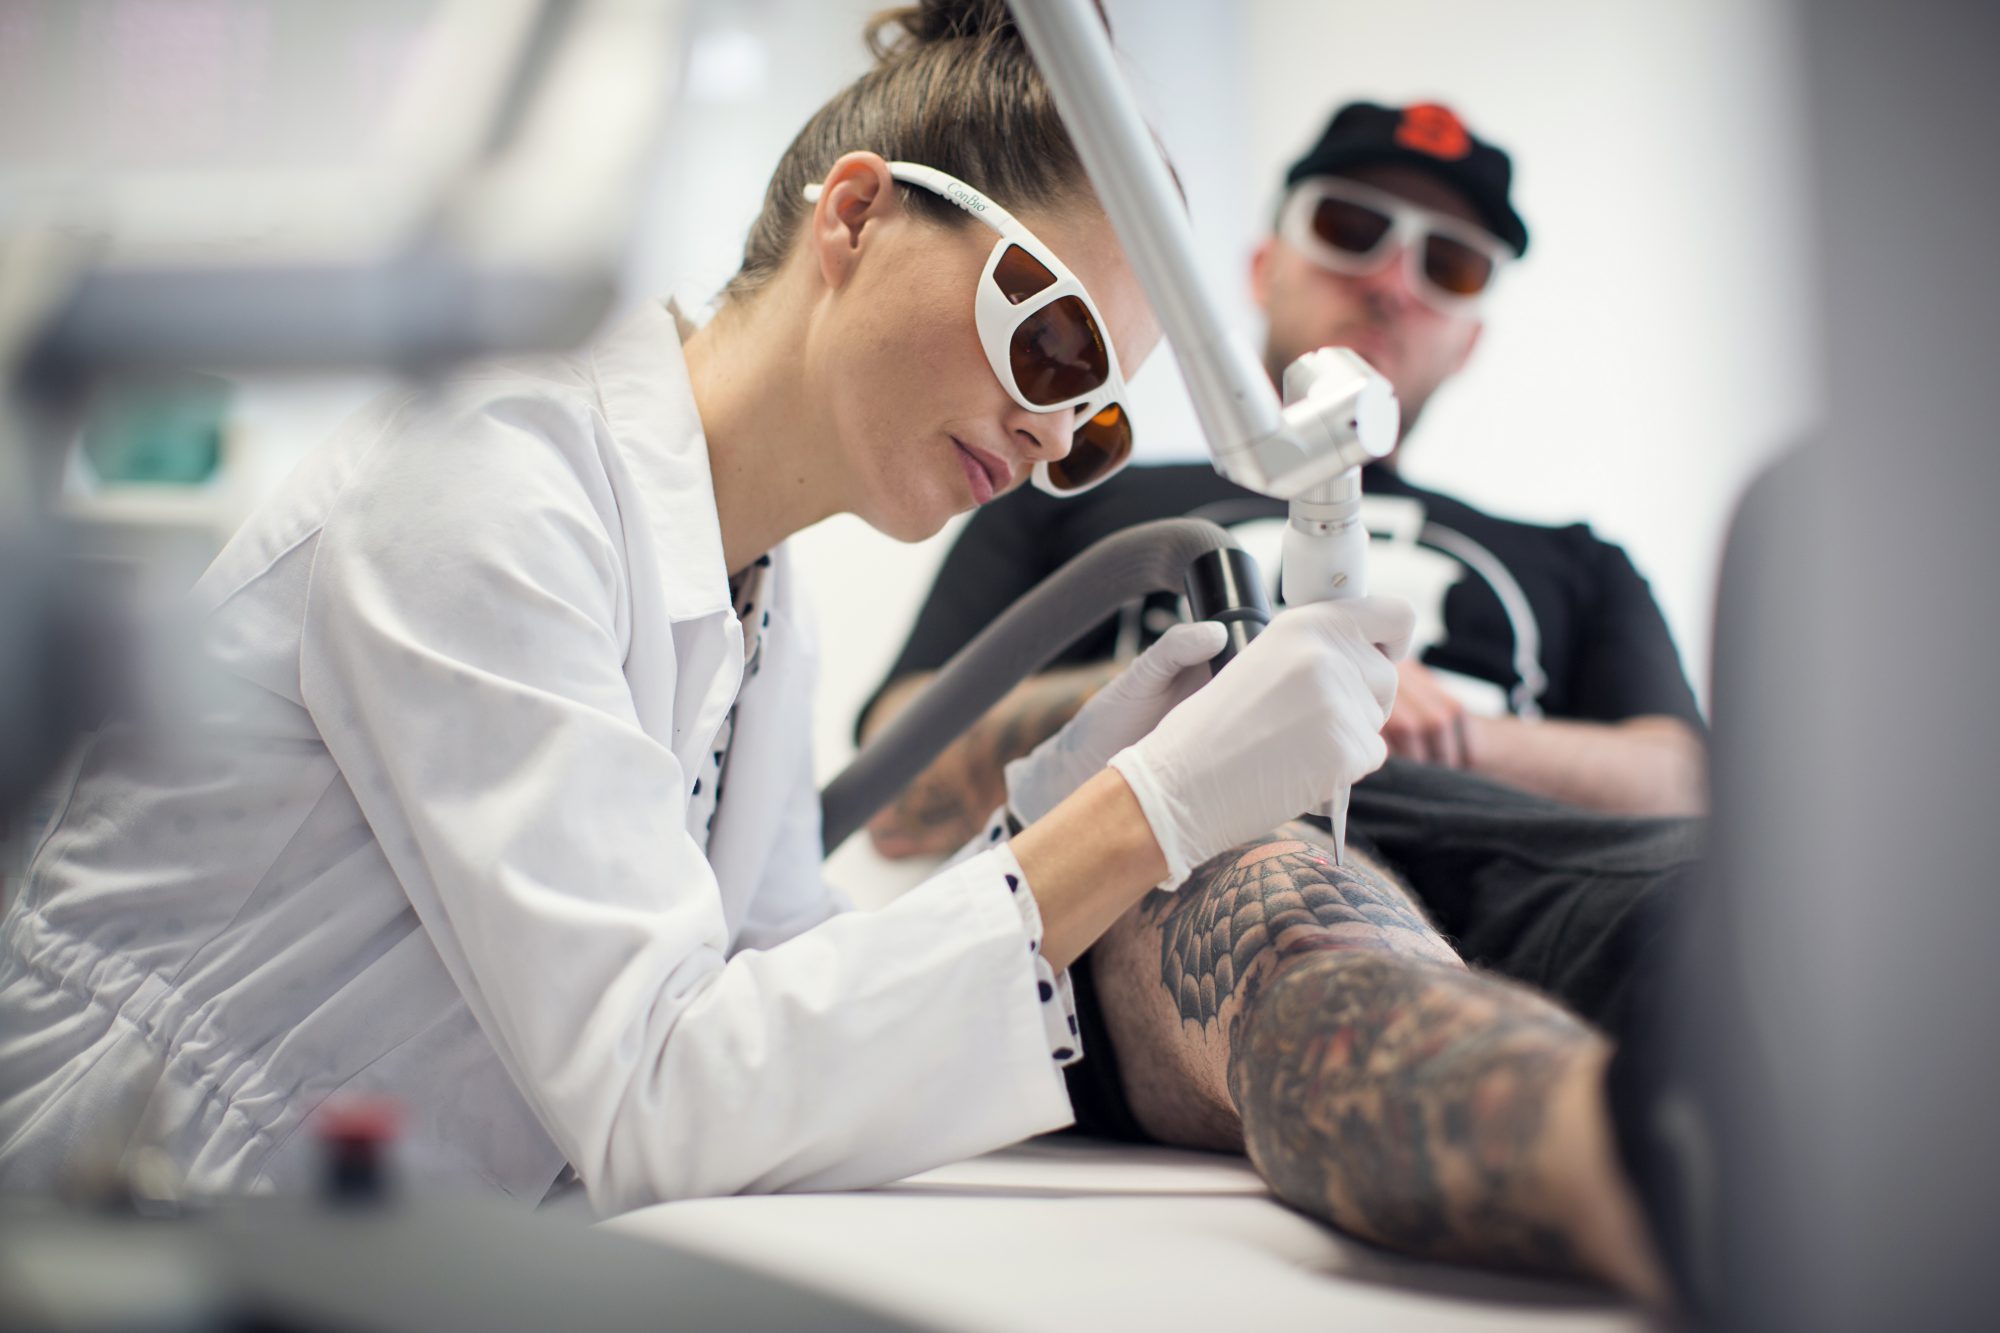 Laser Tattoo Removal using the Cynosure MedLite C6 lifts Industry Standards  - Sacred Laser